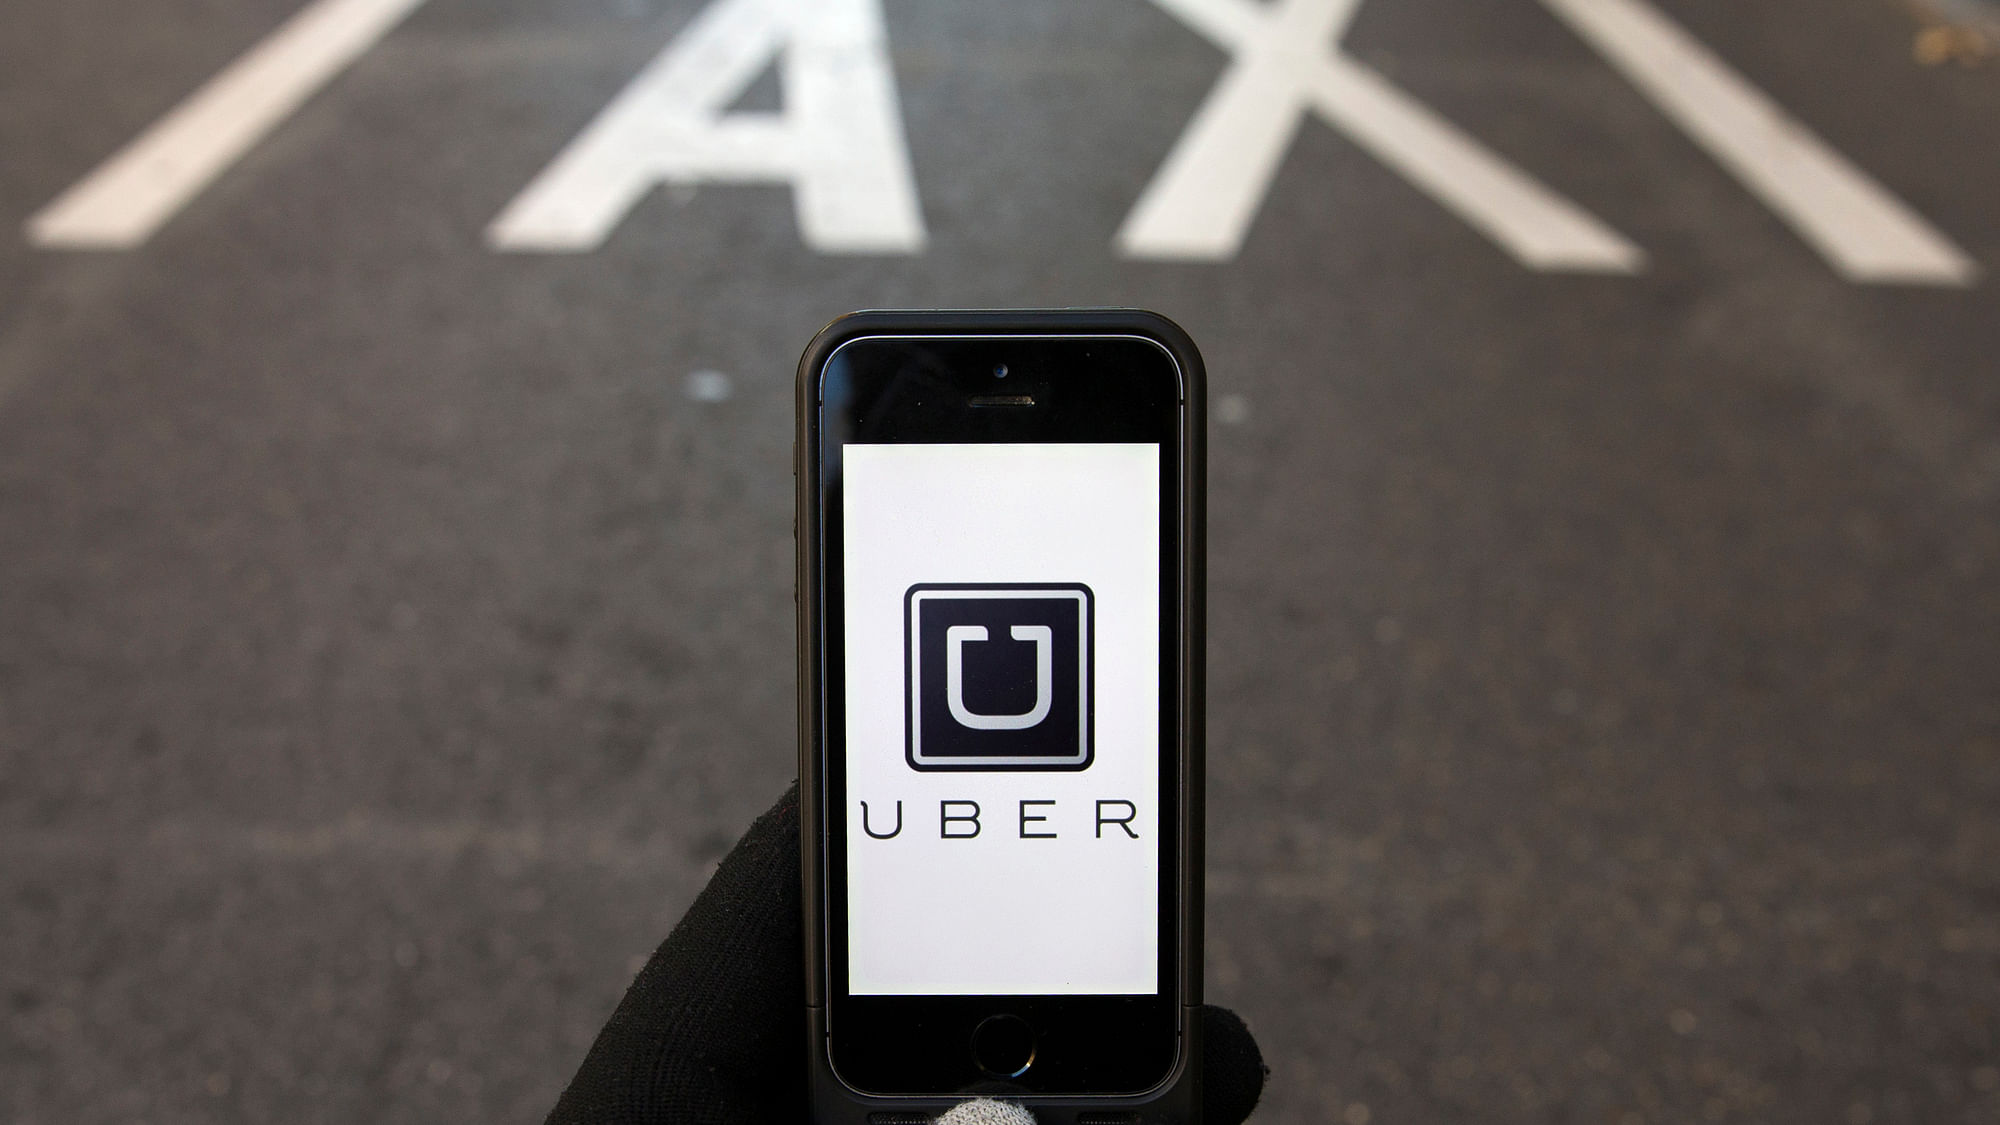 The lawsuit comes on the heels of several controversies surrounding Uber. (Photo: Reuters)